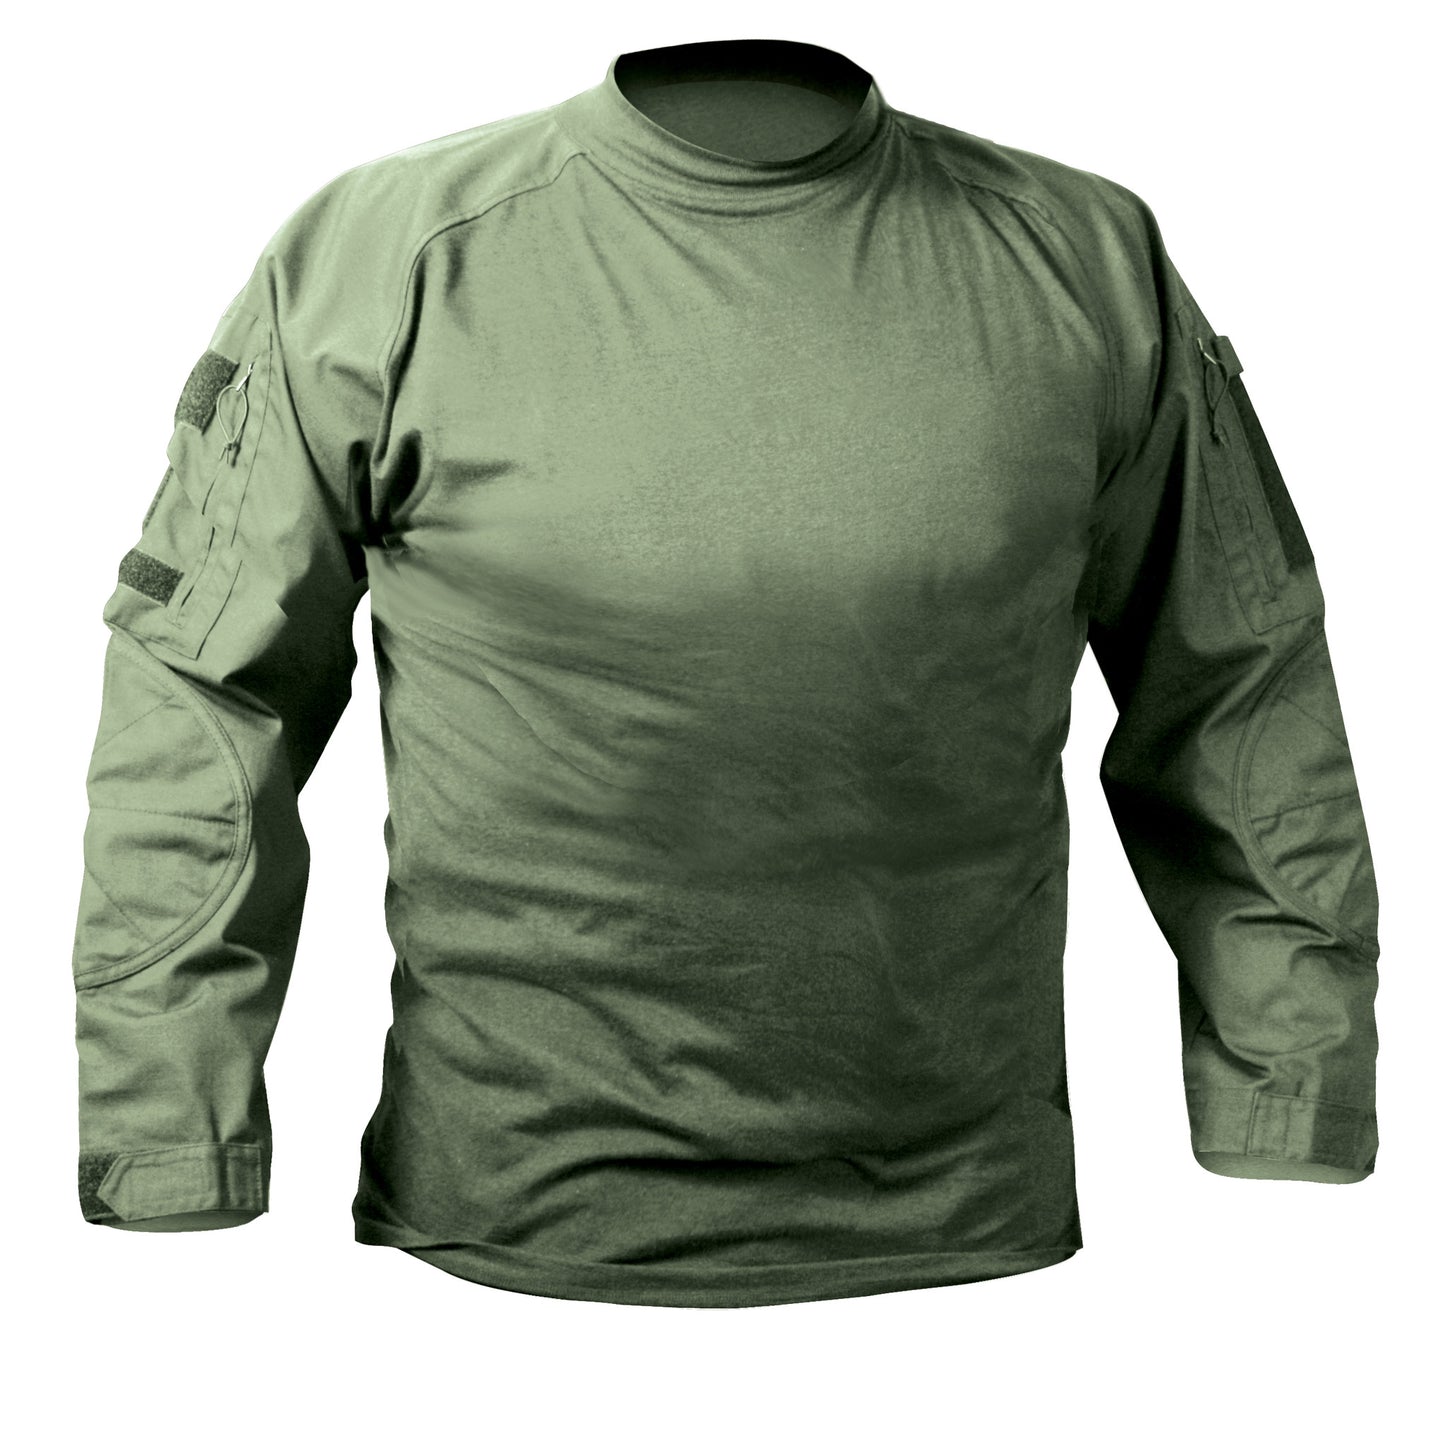 Tactical Combat Shirt - Lightweight Moisture Wicking and Breathable